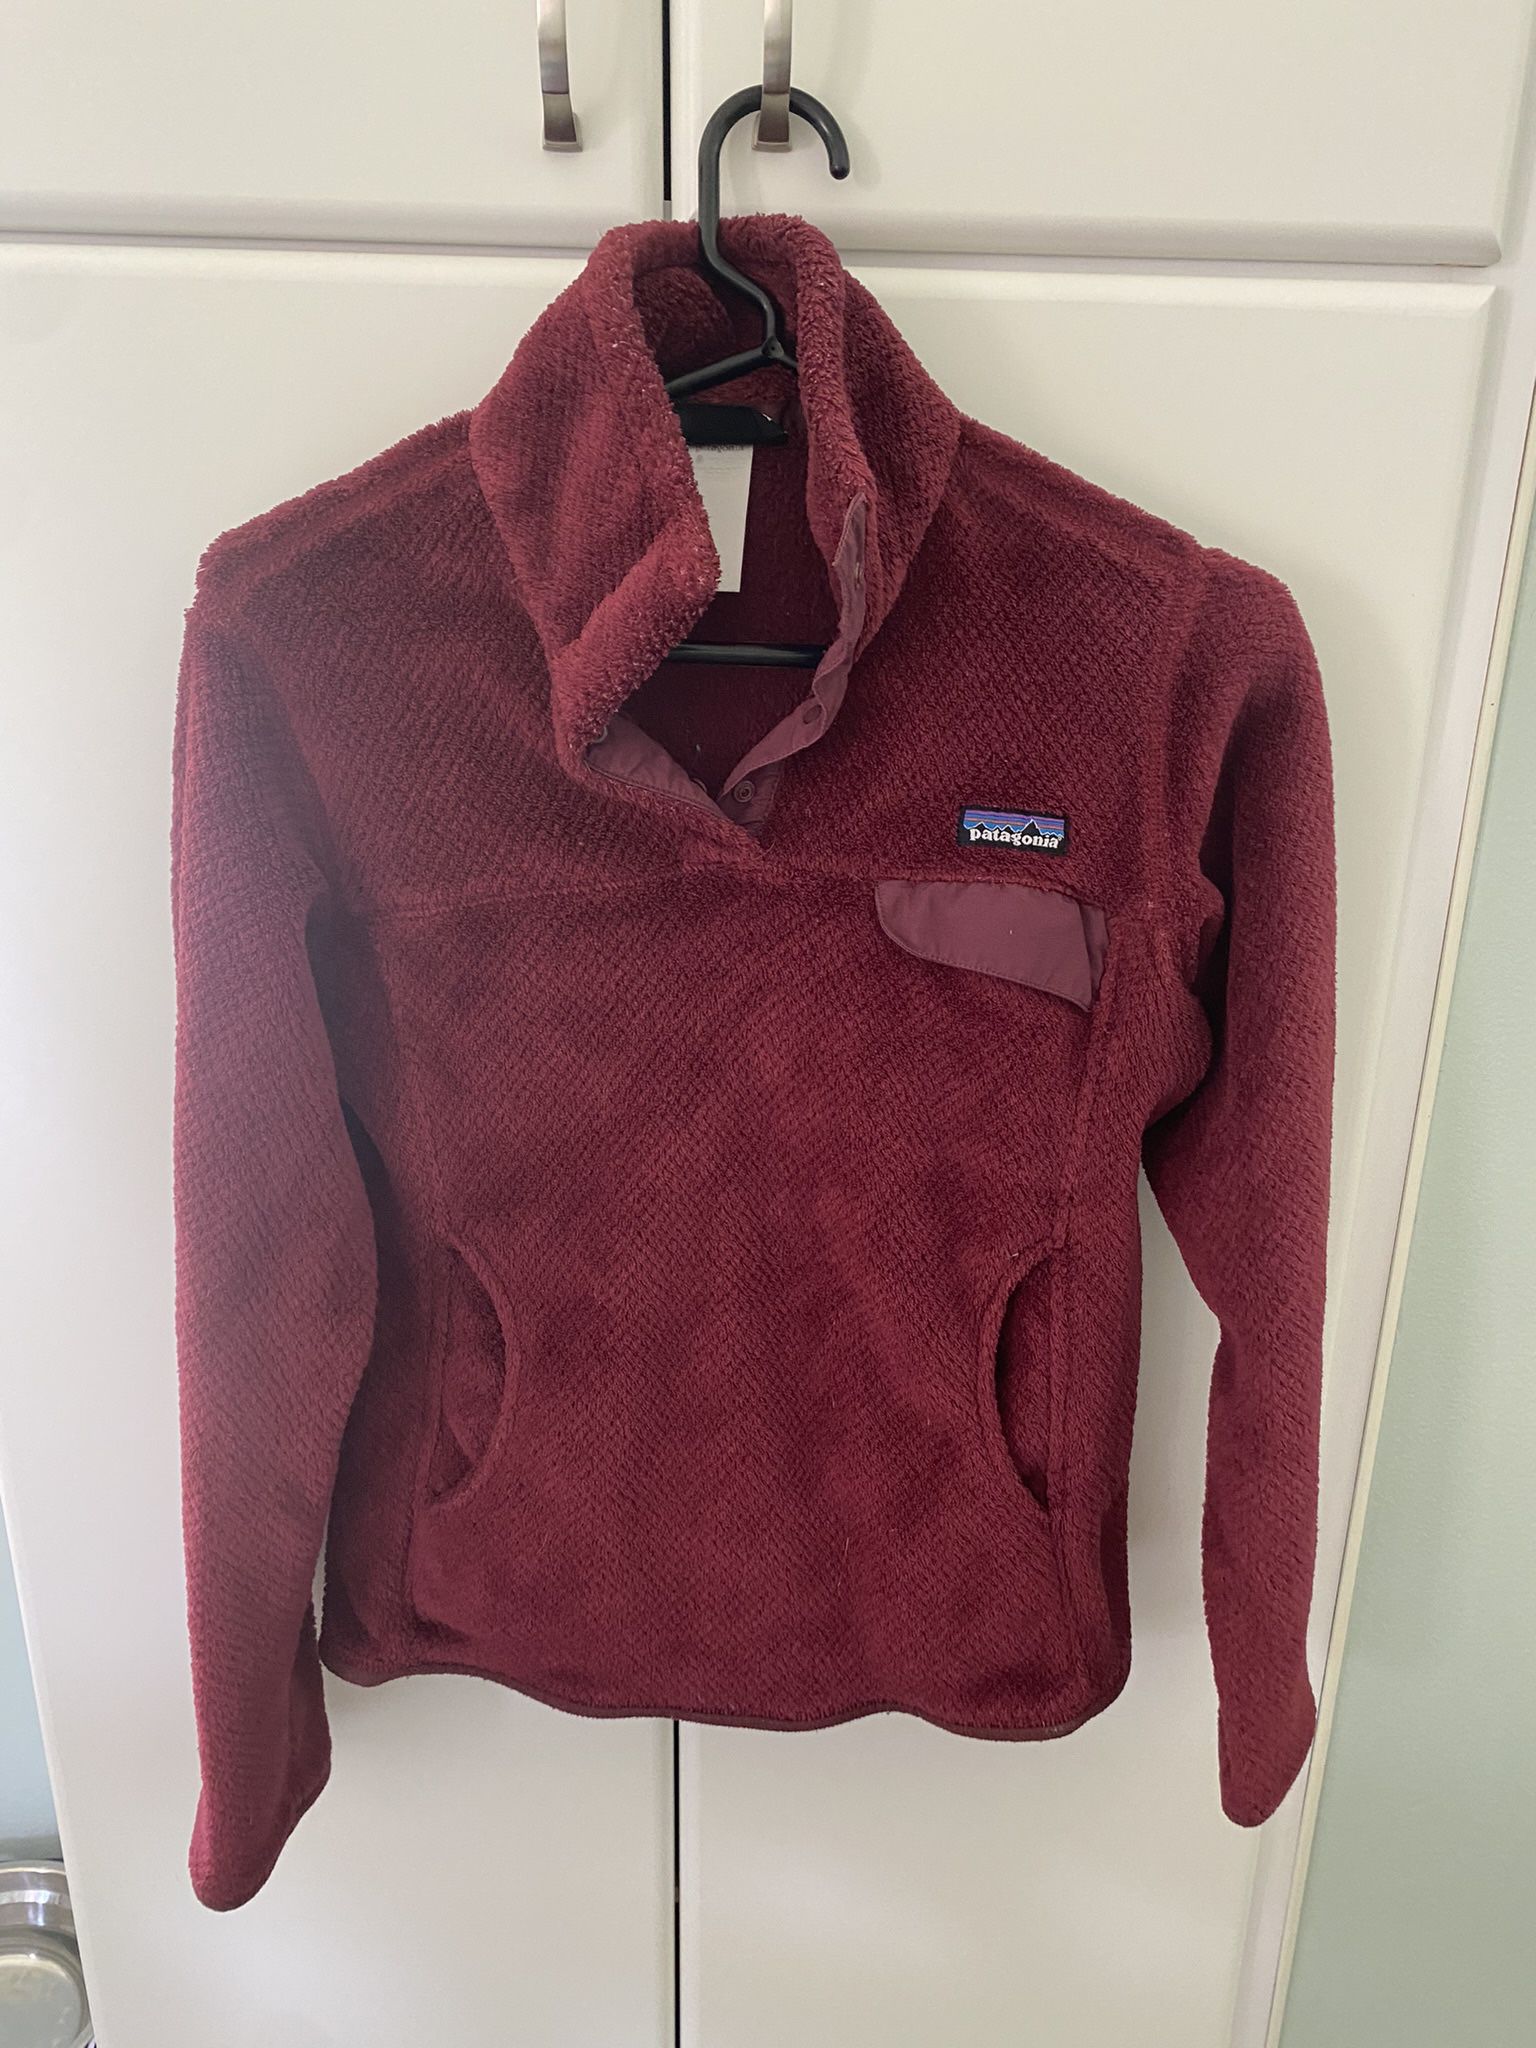 Women’s Patagonia S Small Pullover EUC Fast Shipping Classic Clothing Sweater 